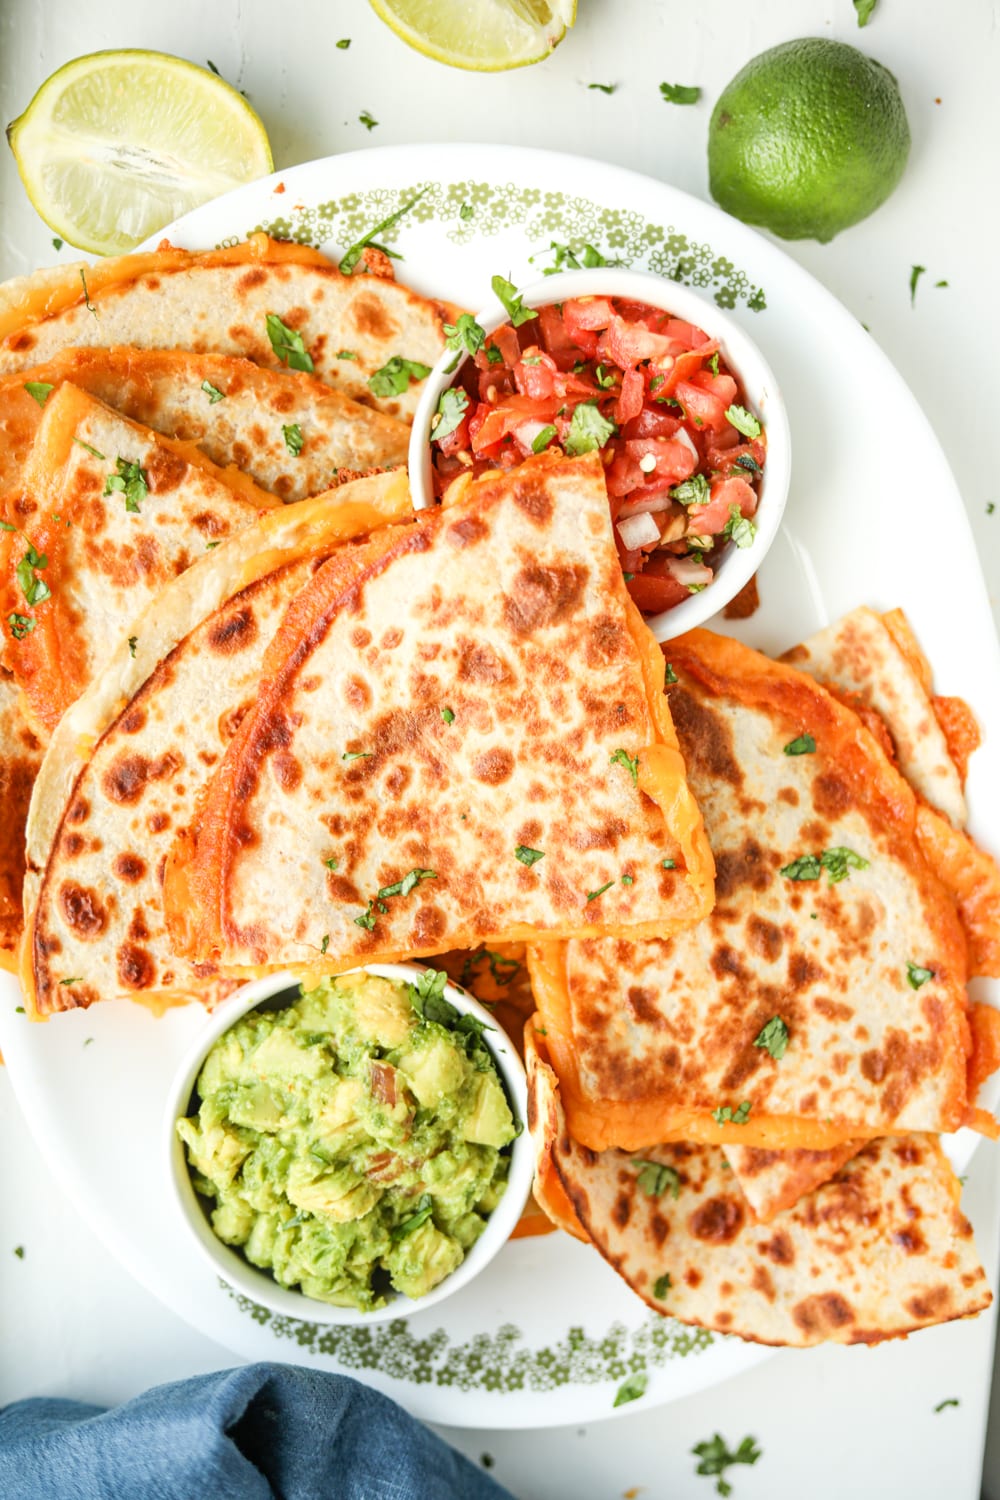 Quesadillas on a platter next to avocado and salsa.